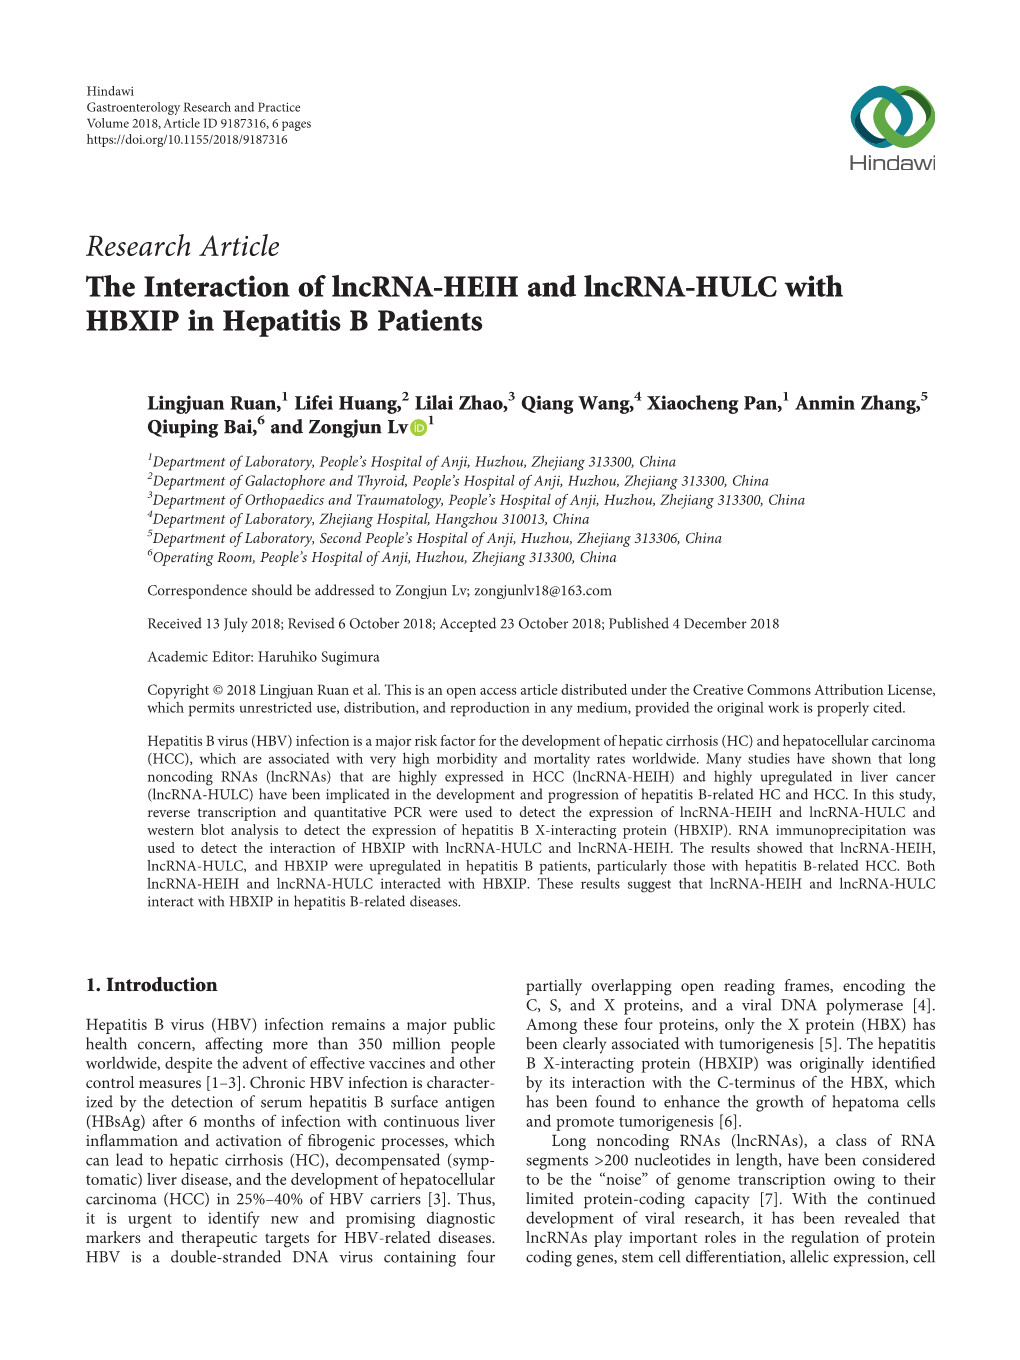 Research Article the Interaction of Lncrna-HEIH and Lncrna-HULC with HBXIP in Hepatitis B Patients